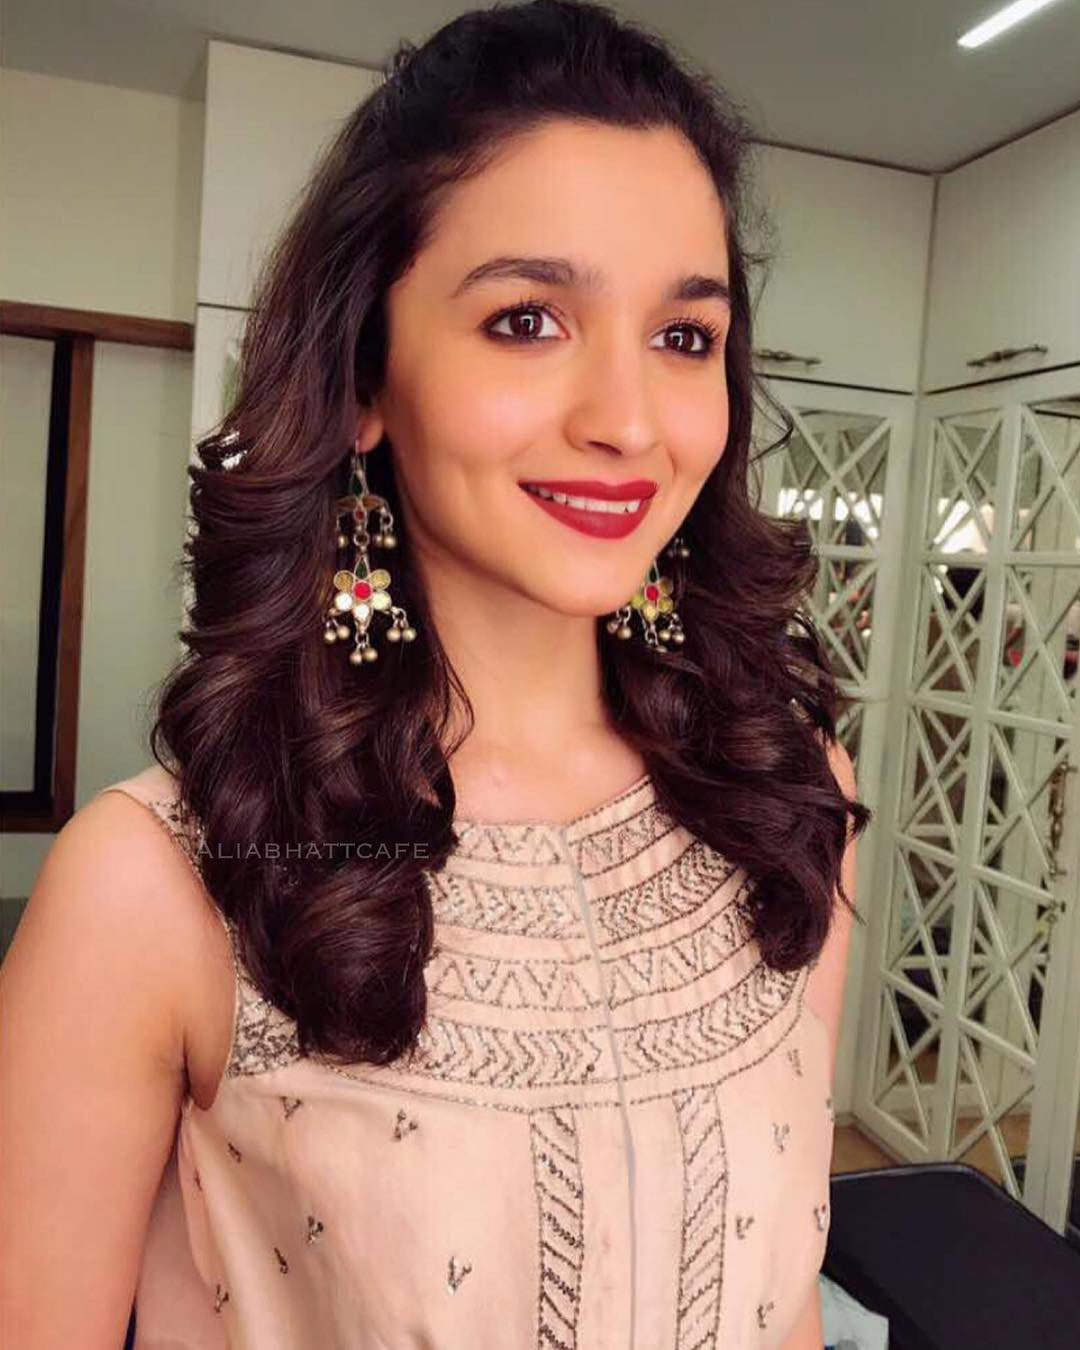 Alia Bhatt Snapped At a Song Launch Event In Mumbai